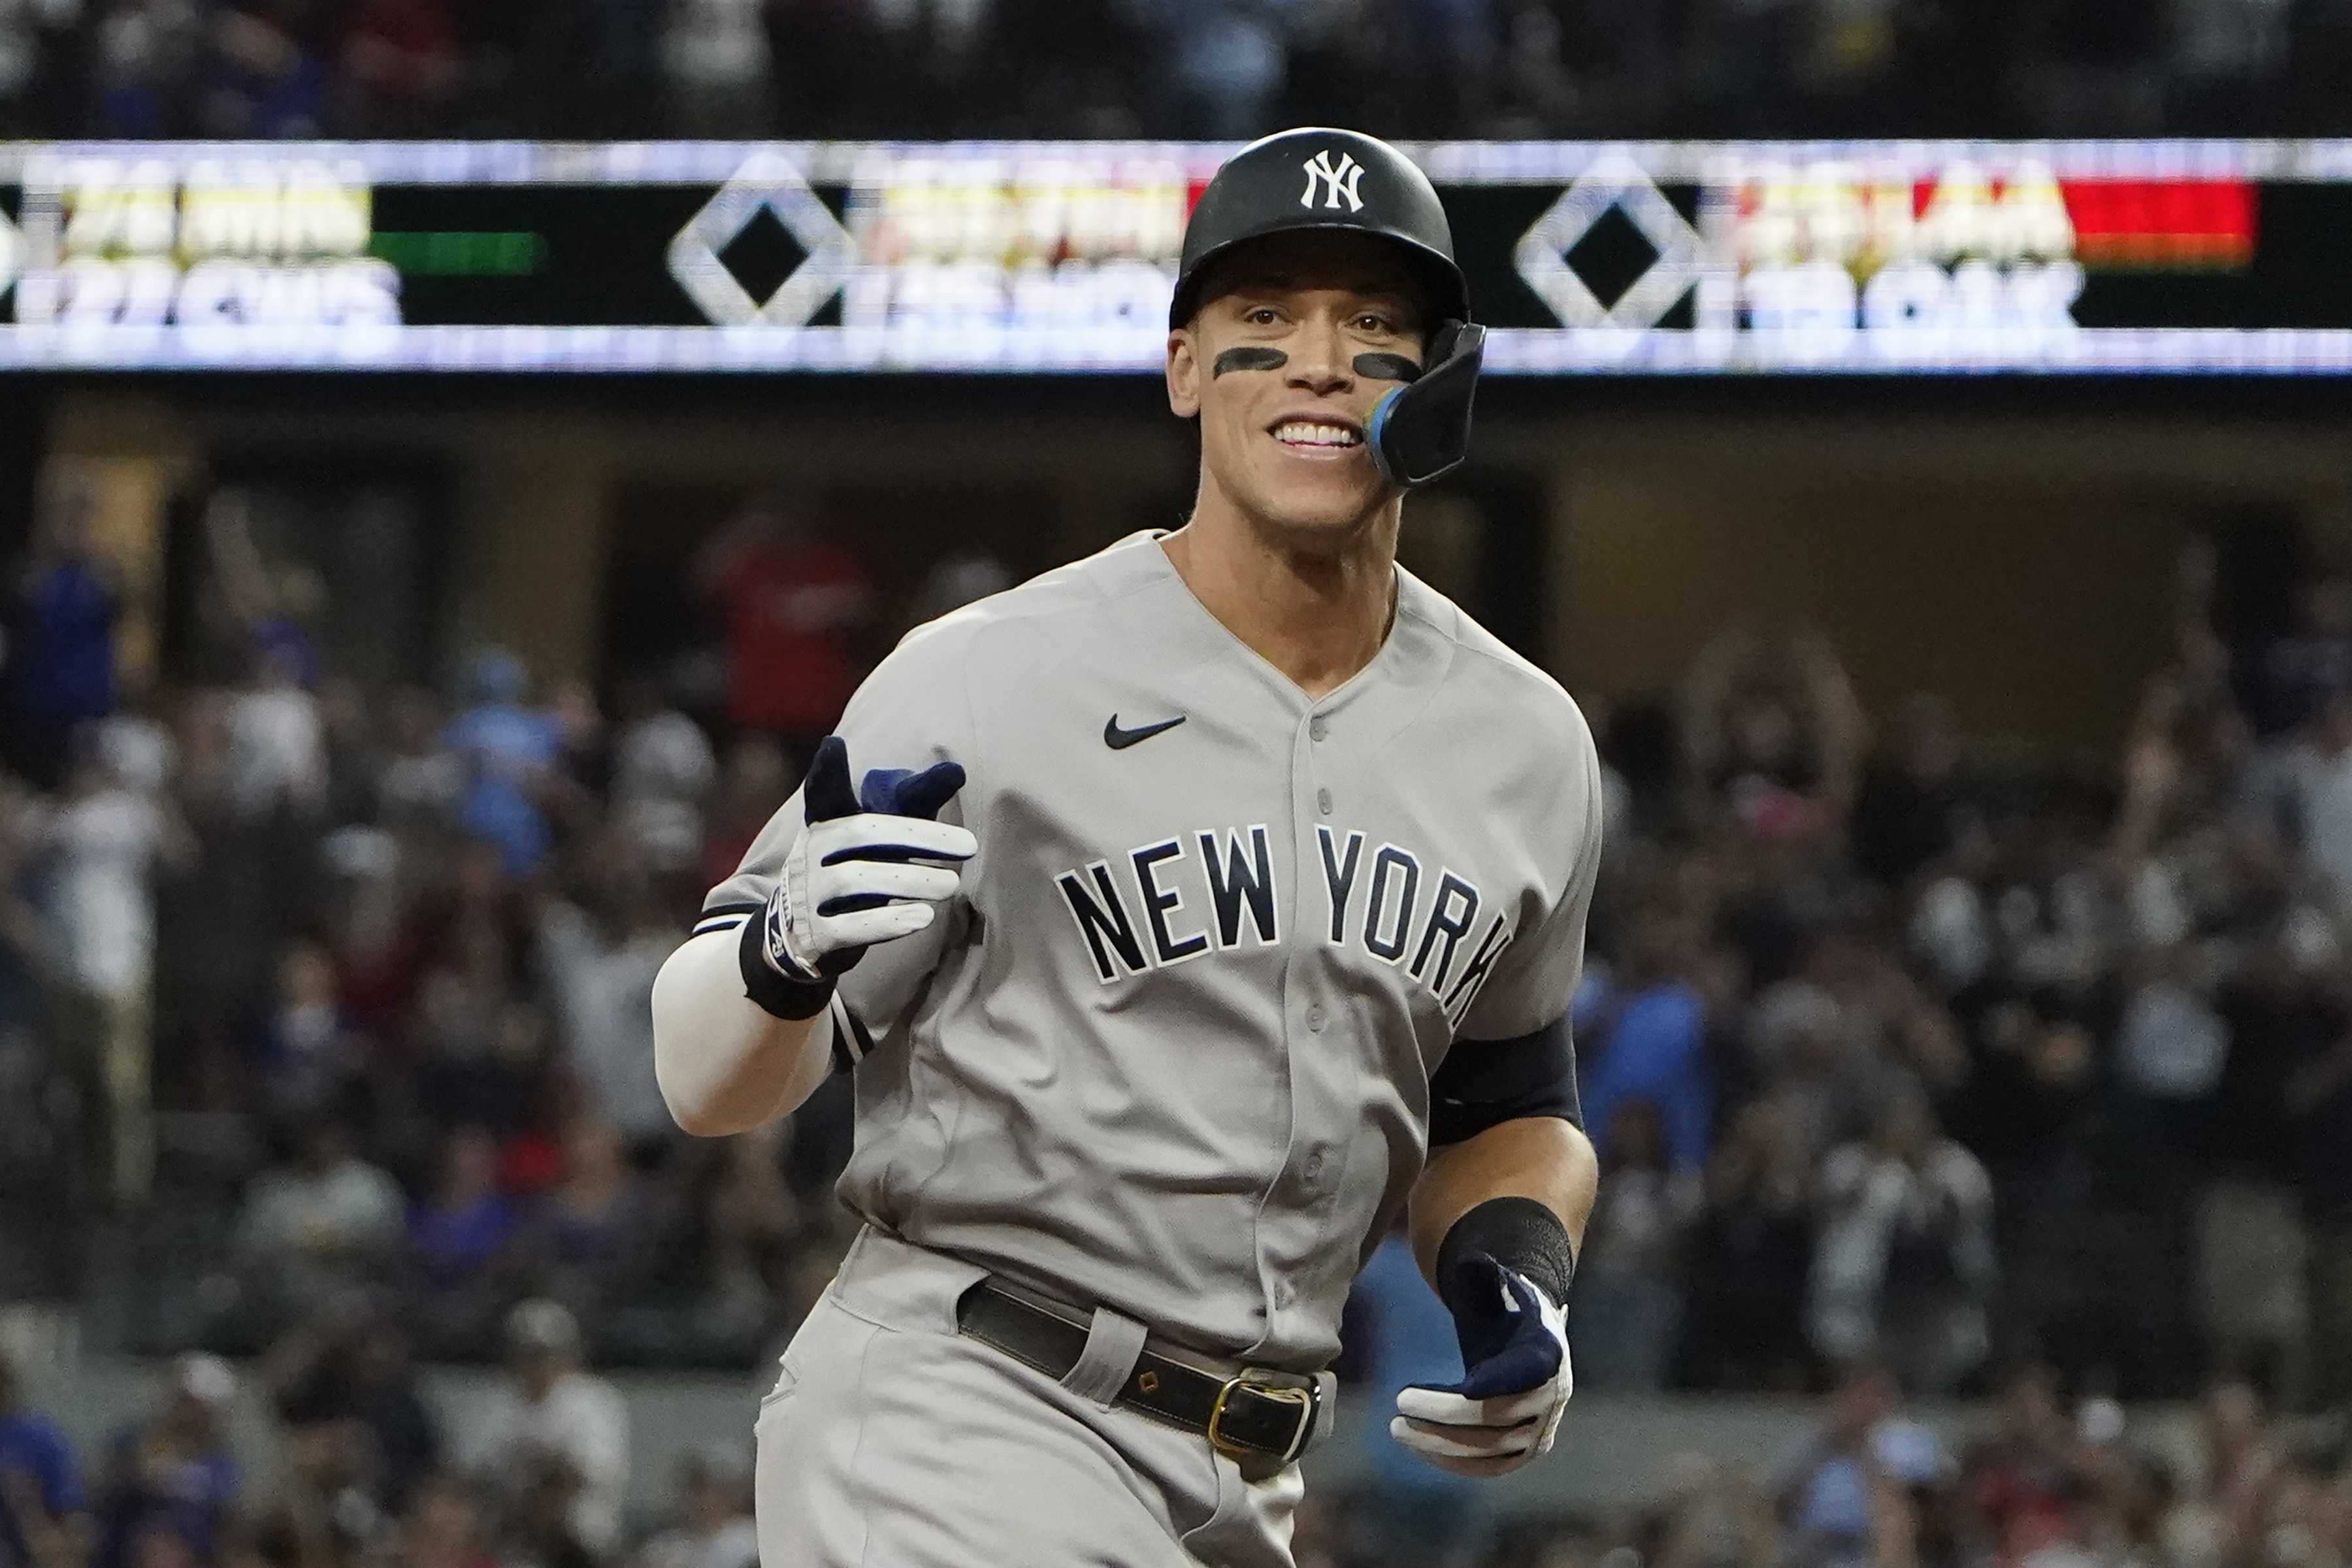 Aaron Judge's Yankees frustration comes out during free agency